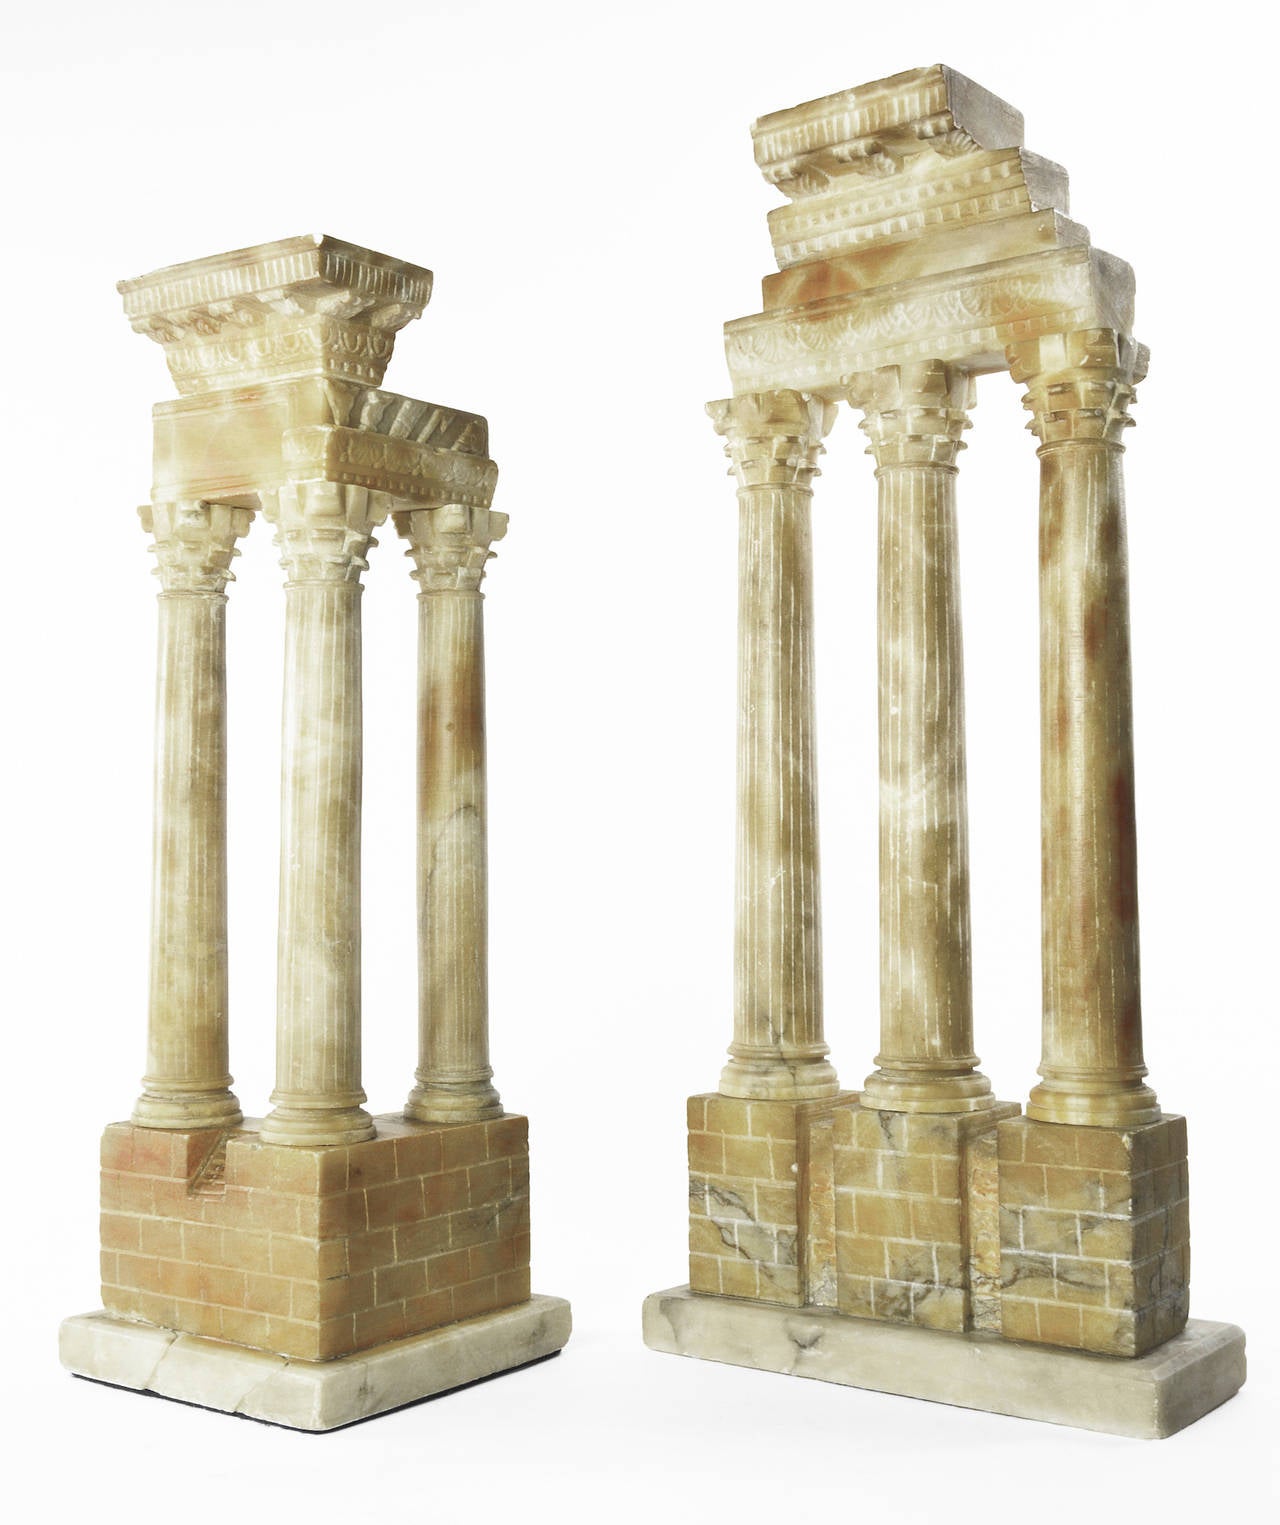 Beginning in the first part of the 19th century, Roman stone carvers produced well-detailed models of these recently excavated and restored temple ruins in the Forum. Later in the century, distinctive variegated alabasters from Volterra were